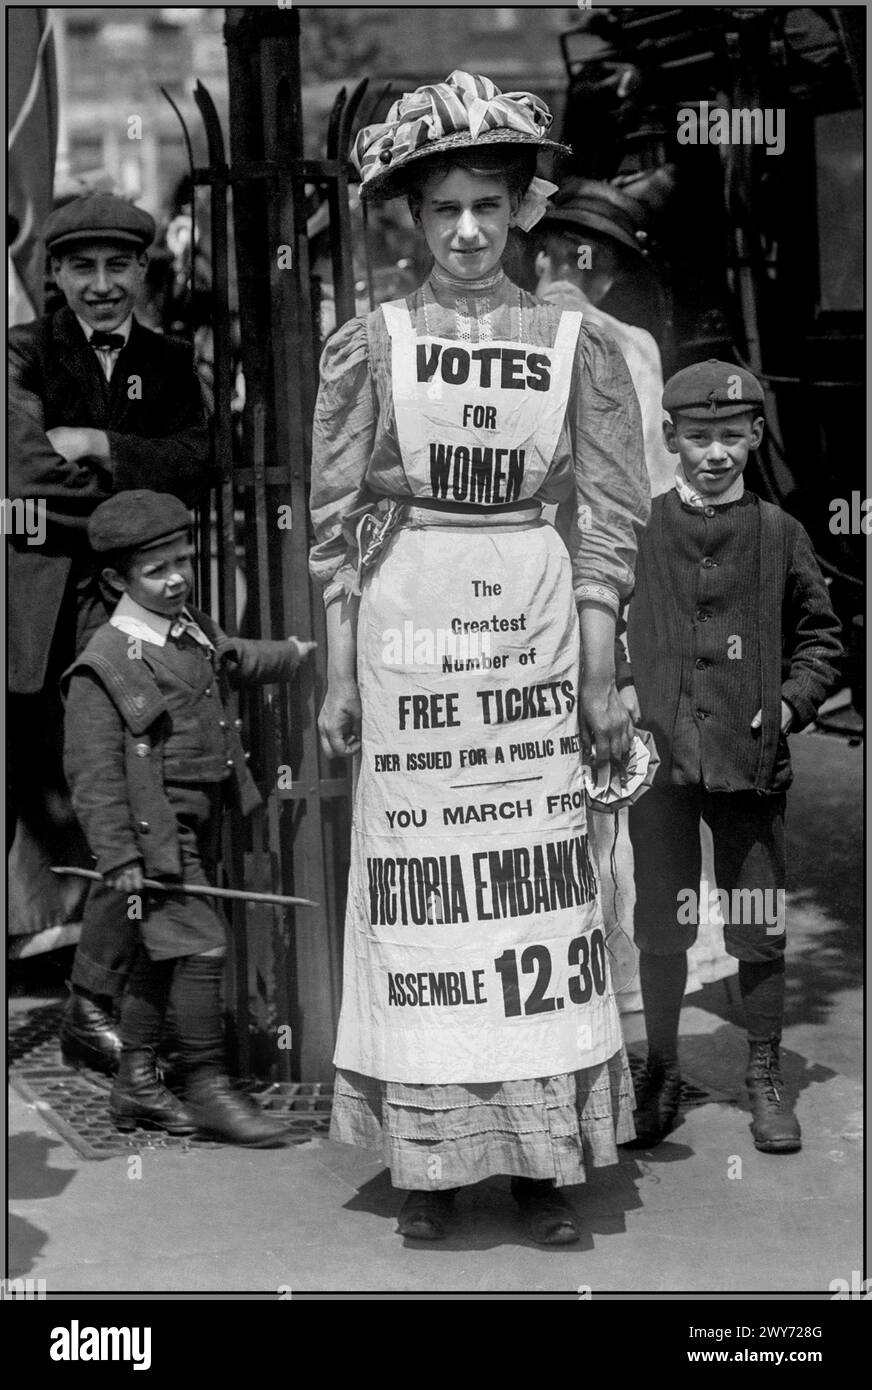 SUFFRAGETTE UK Votes for women London UK Suffragette movement. 1908 Vera Wentworth in the Strand London wearing a housemaids apron with 'VOTES FOR WOMEN' promoting a suffrage march from Victoria Embankment London.from 12.30 pm Stock Photo